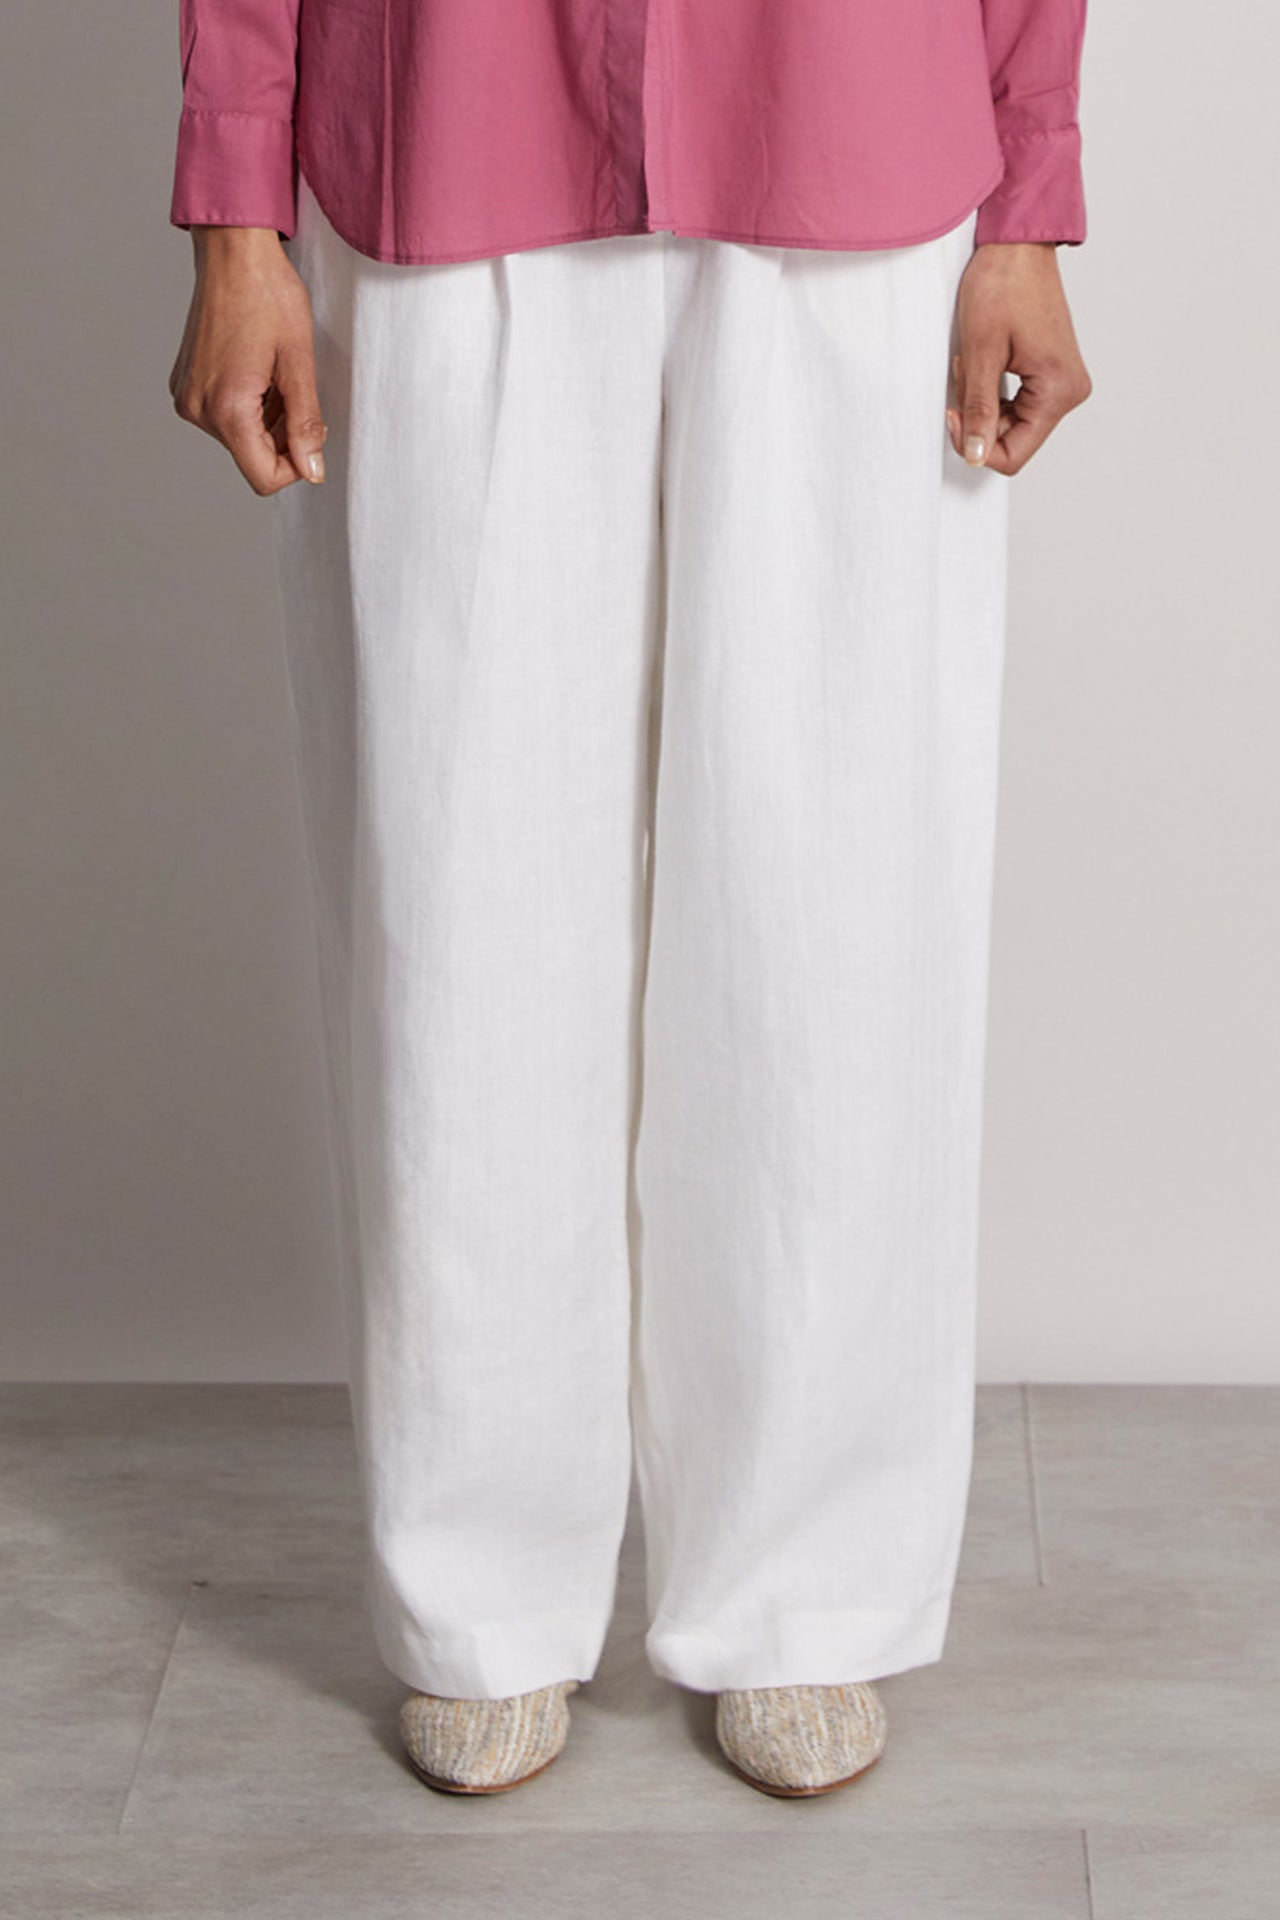 Giglio linen pants